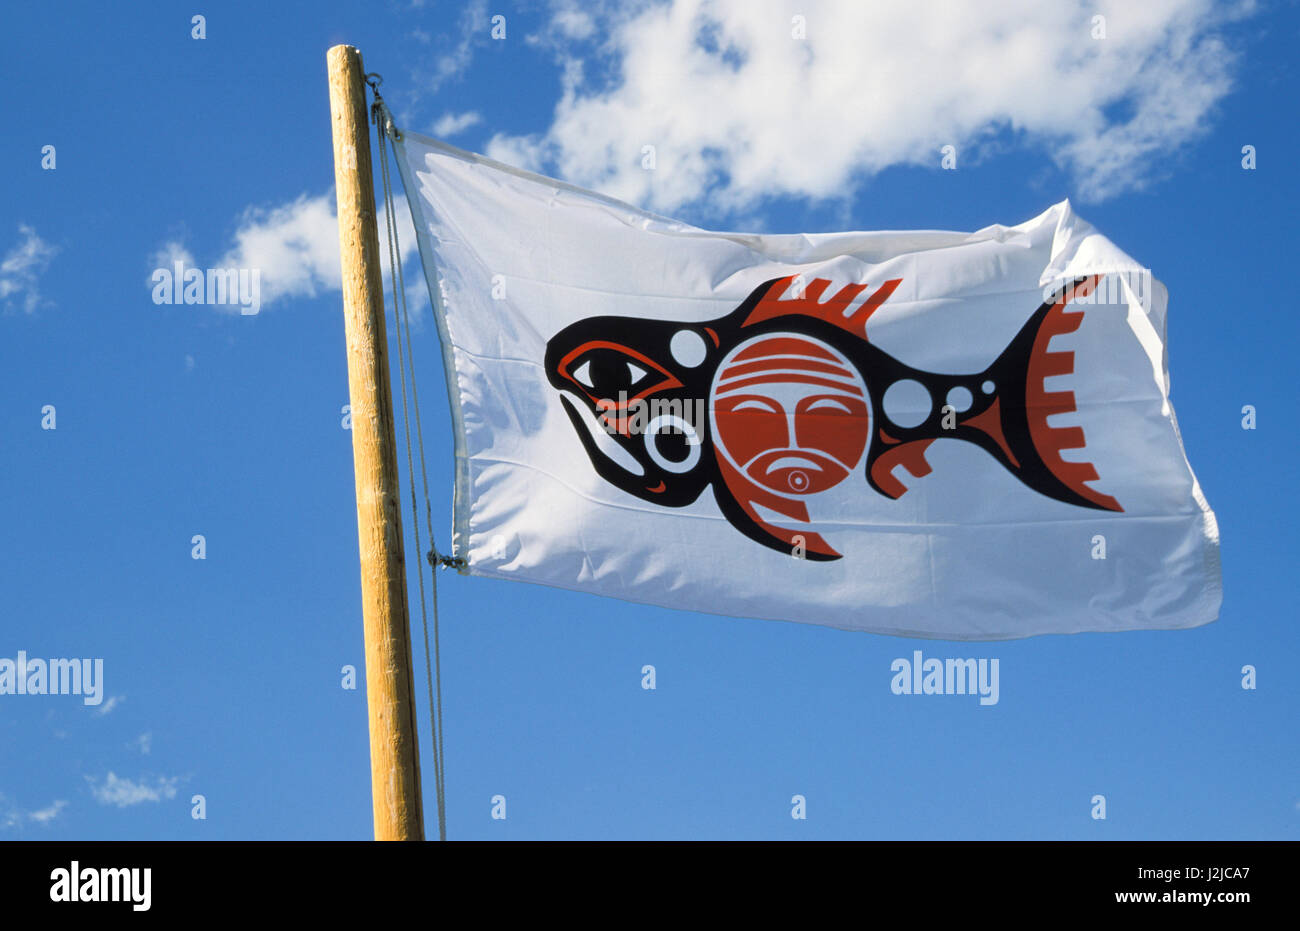 Chinook seal of a salmon with the traditional designs of the northwest is on their tribal flag as the Chinook Indian symbol Stock Photo